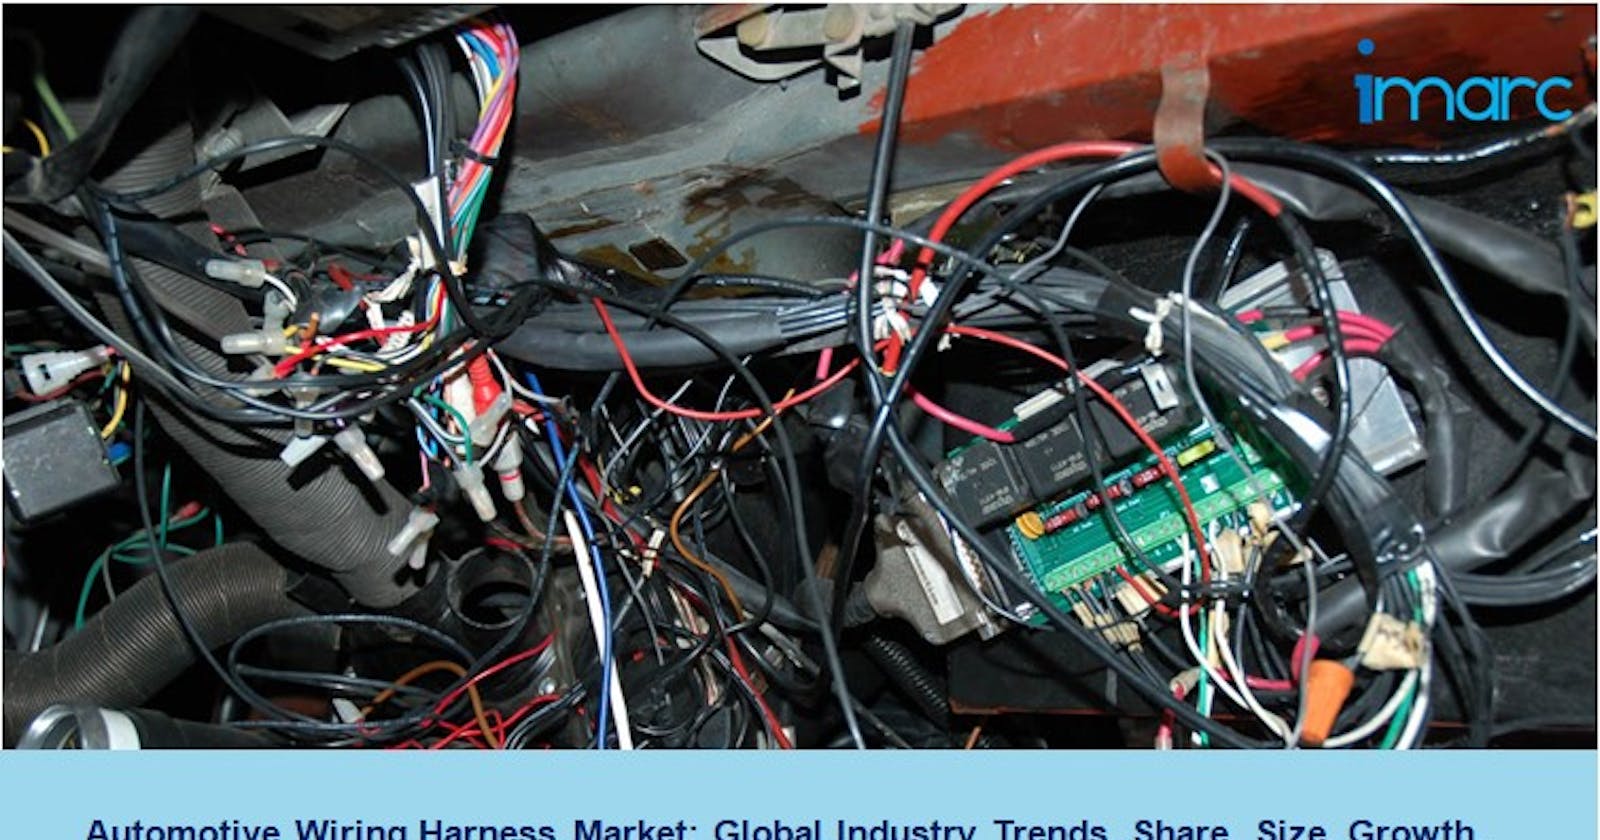 Automotive Wiring Harness Market Size, Share, Growth and Forecast 2022-2027